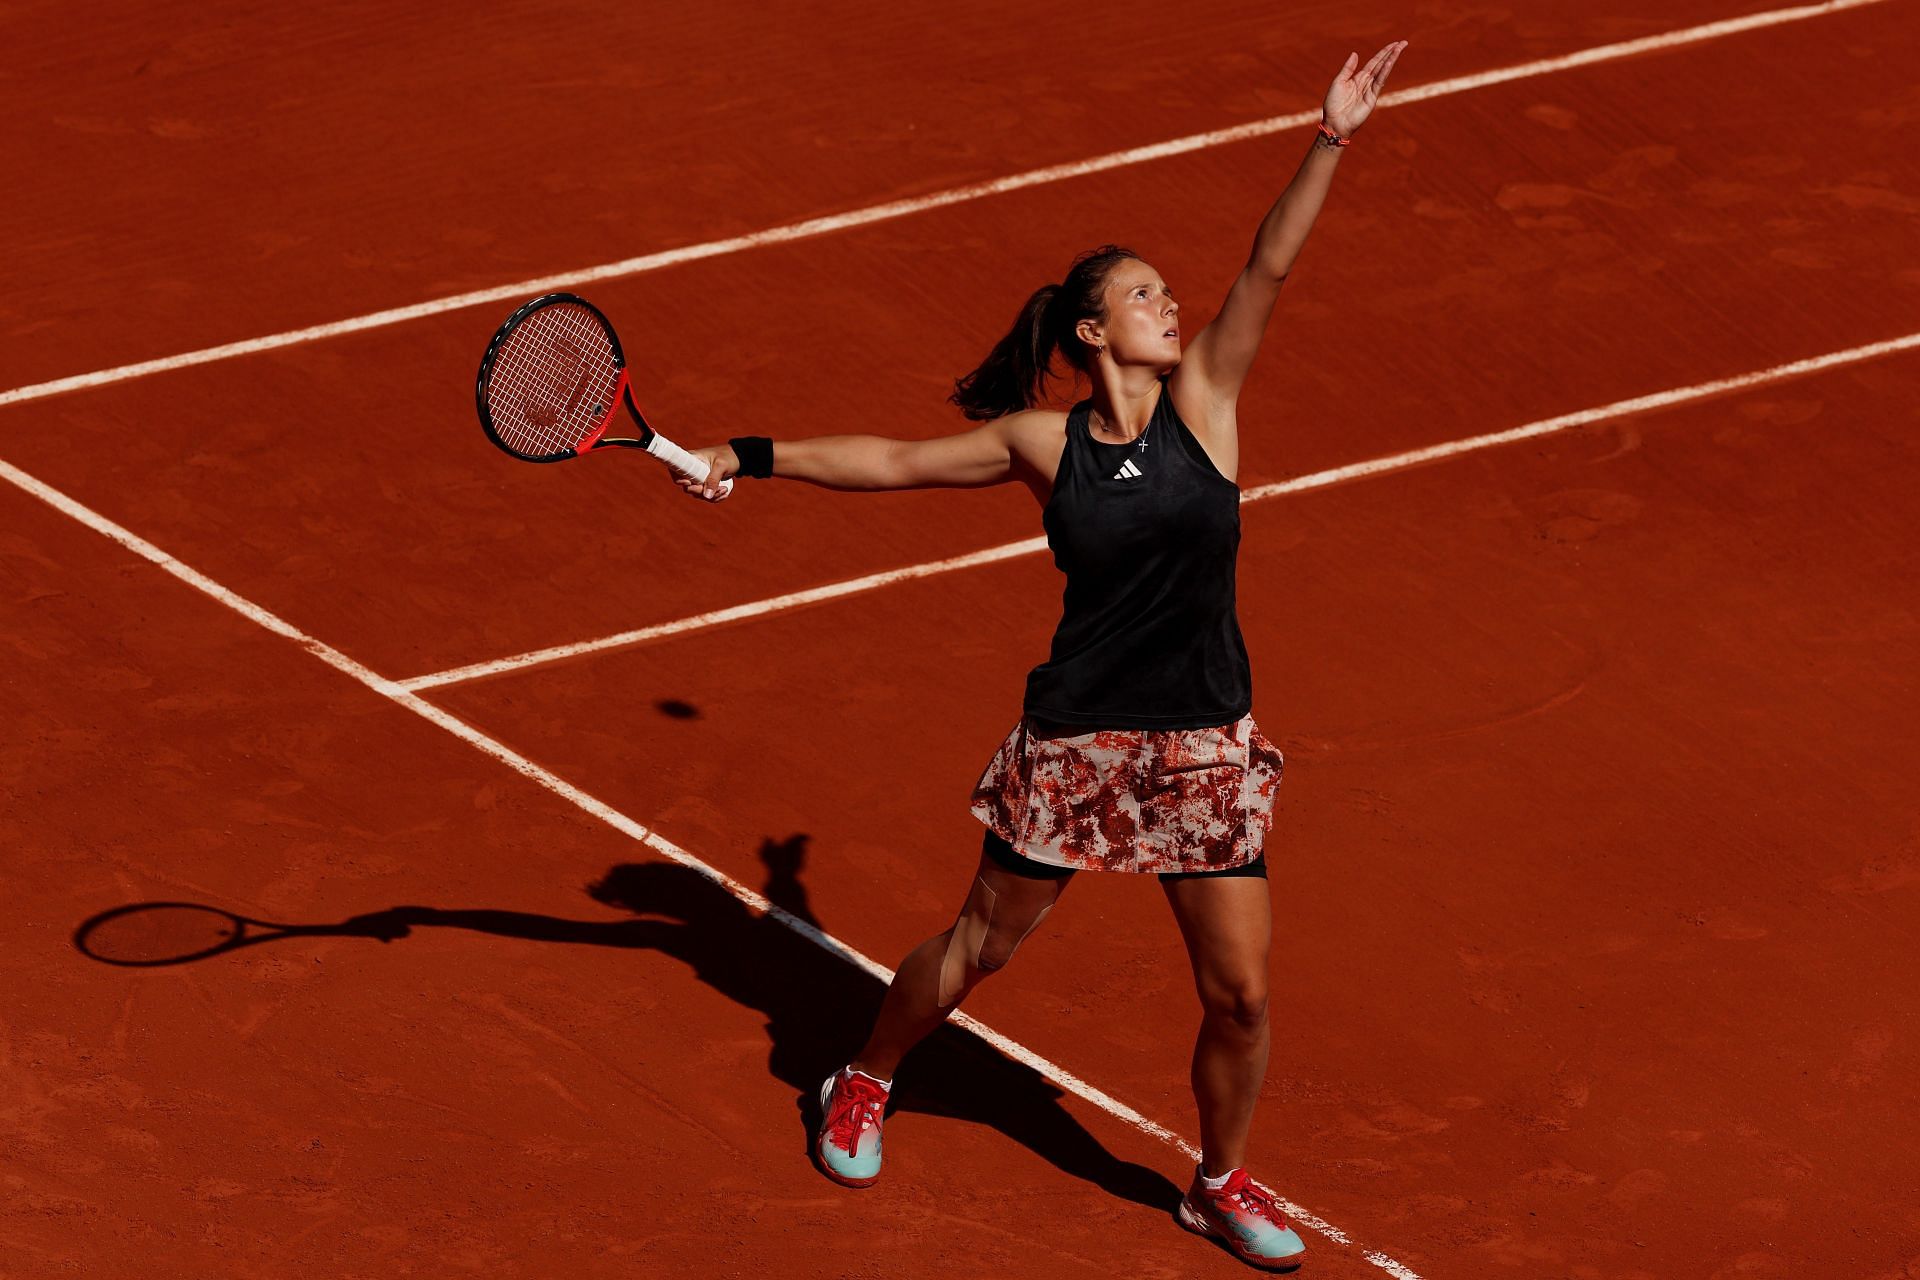 Daria Kasatkina in action at the French Open